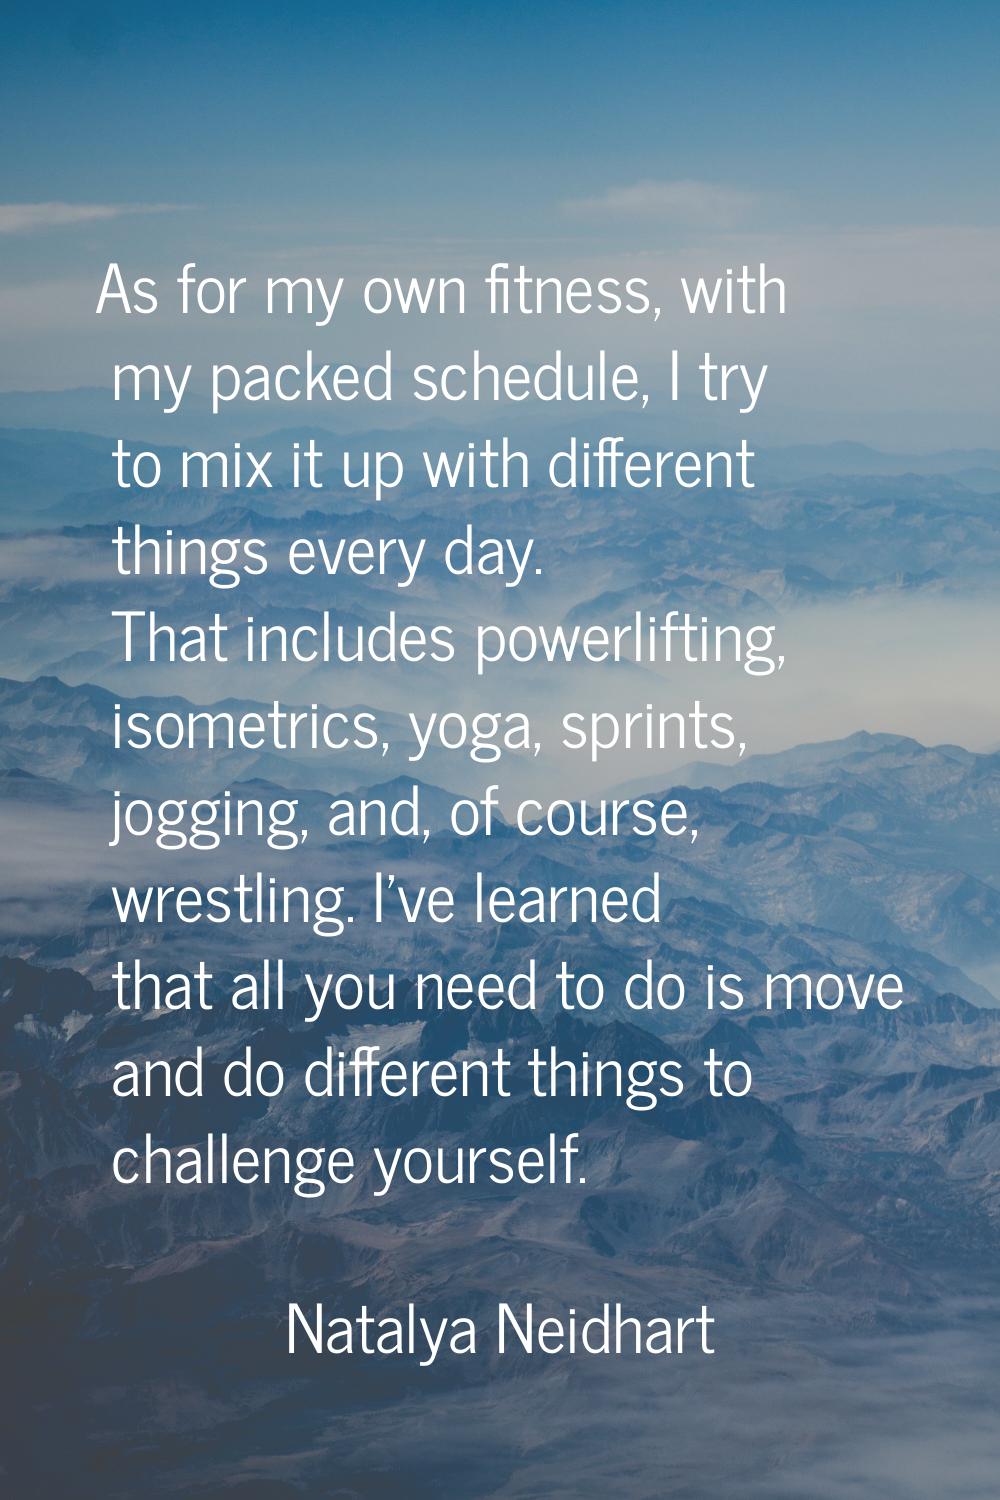 As for my own fitness, with my packed schedule, I try to mix it up with different things every day.